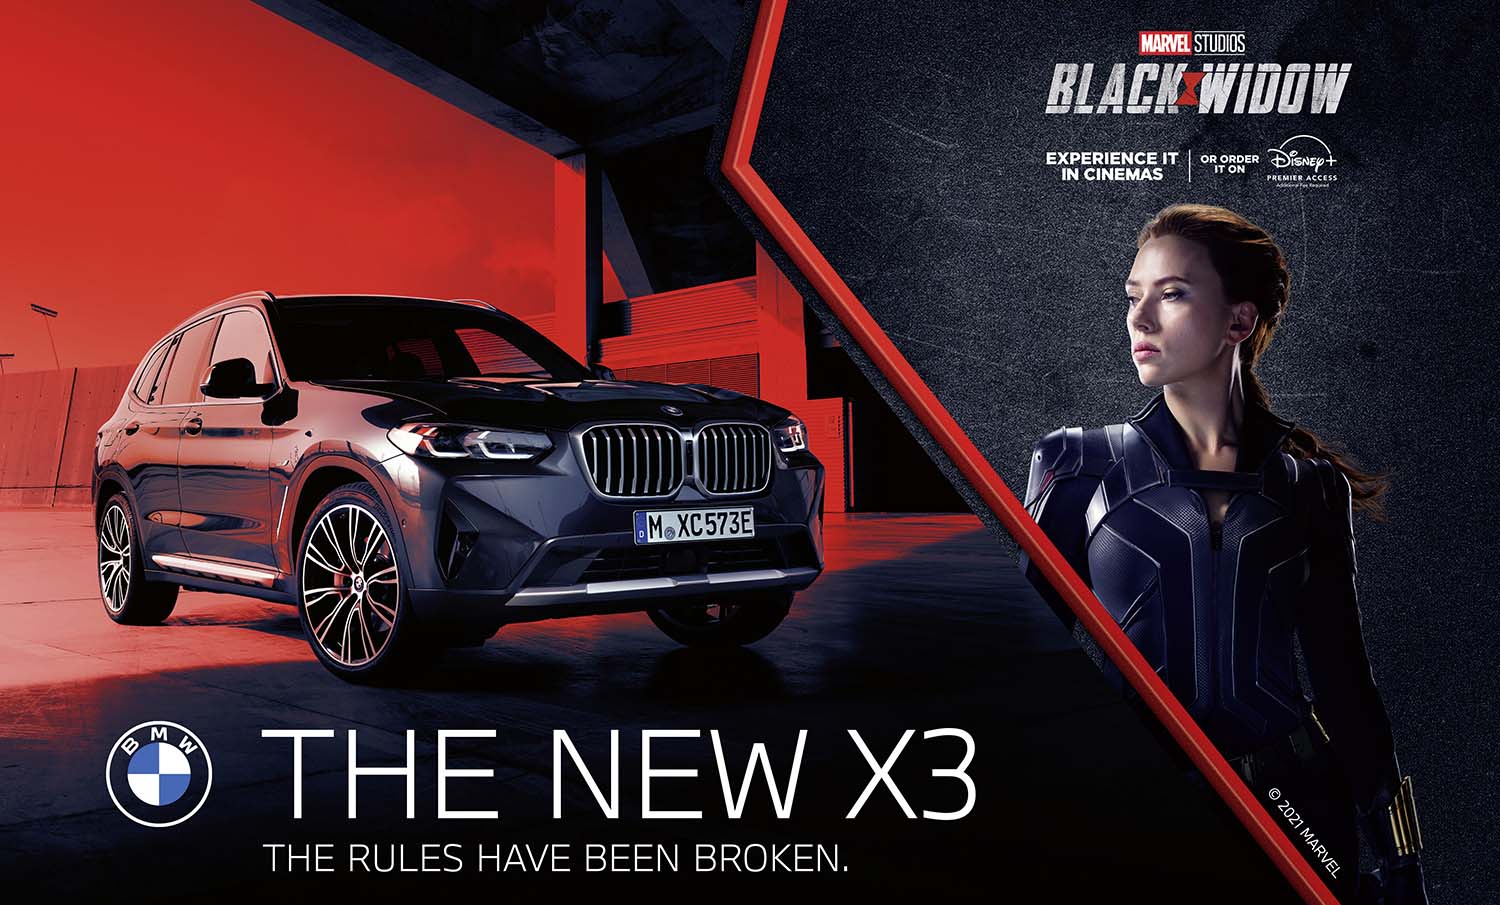 BMW Teams Up With Marvel Studios’ Black Widow For A Spectacular Cinema Experience.